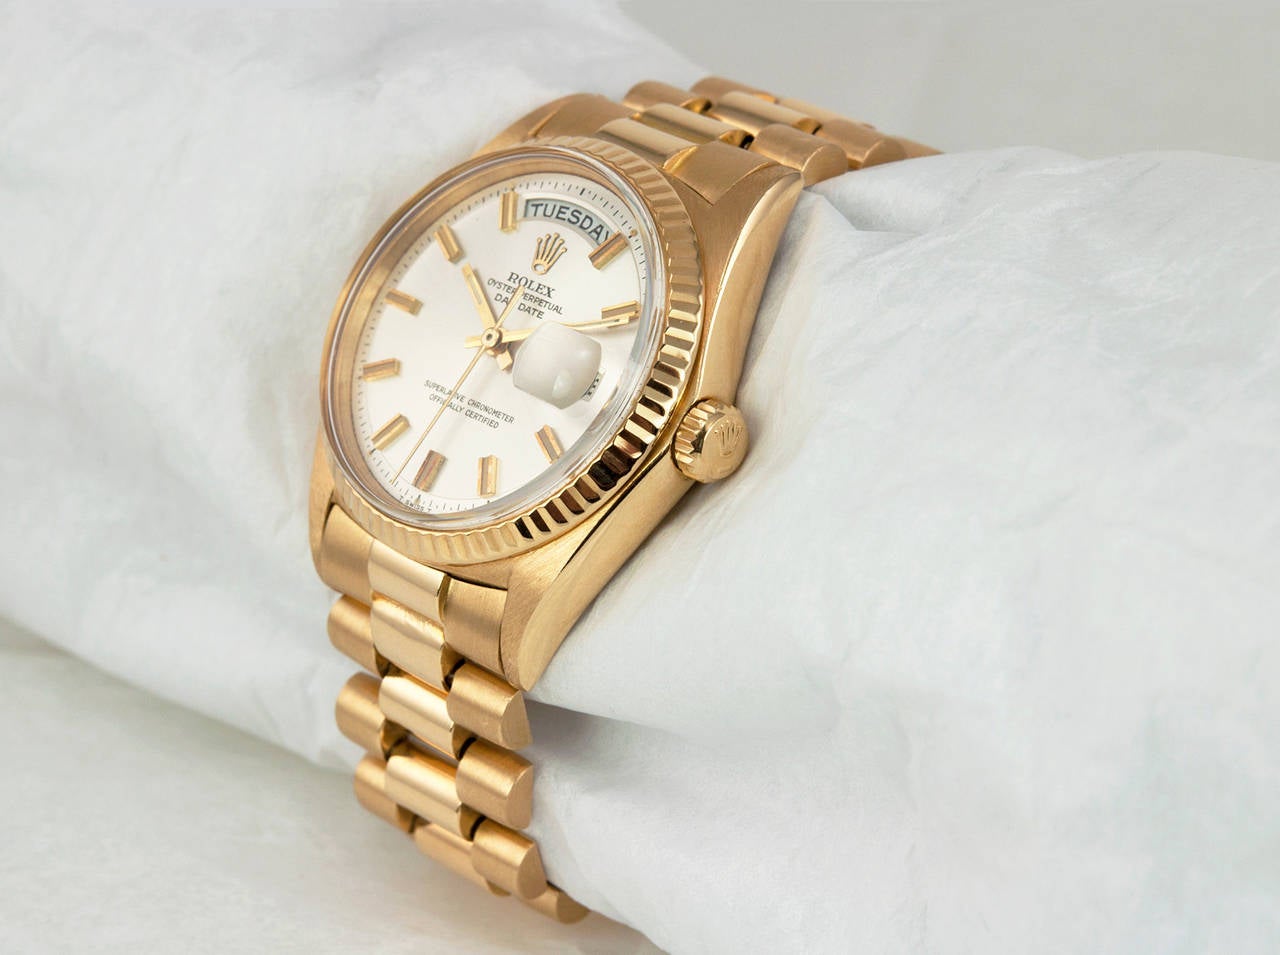 Rolex 18k yellow gold Day-Date President wristwatch, Ref 18038. This classic single-quick-set President watch, features an automatic movement, waterproof screw-down crown, scratch-resistant sapphire crystal, original satin dial, with an 18k yellow